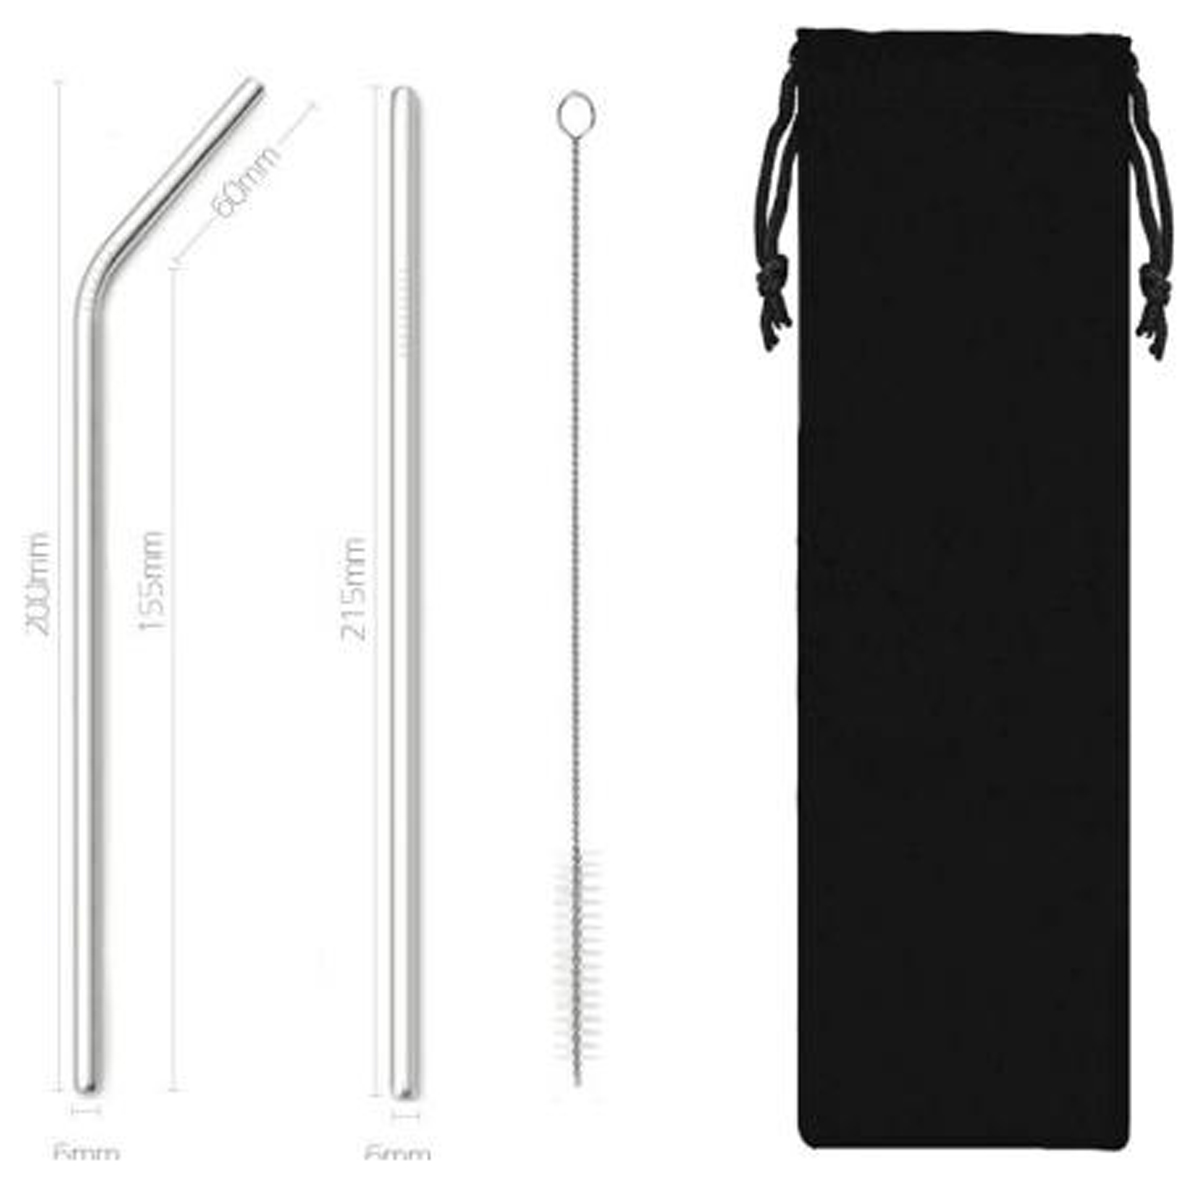 GL-ELY1251 3 in 1 Stainless Steel Straw Set with Brush